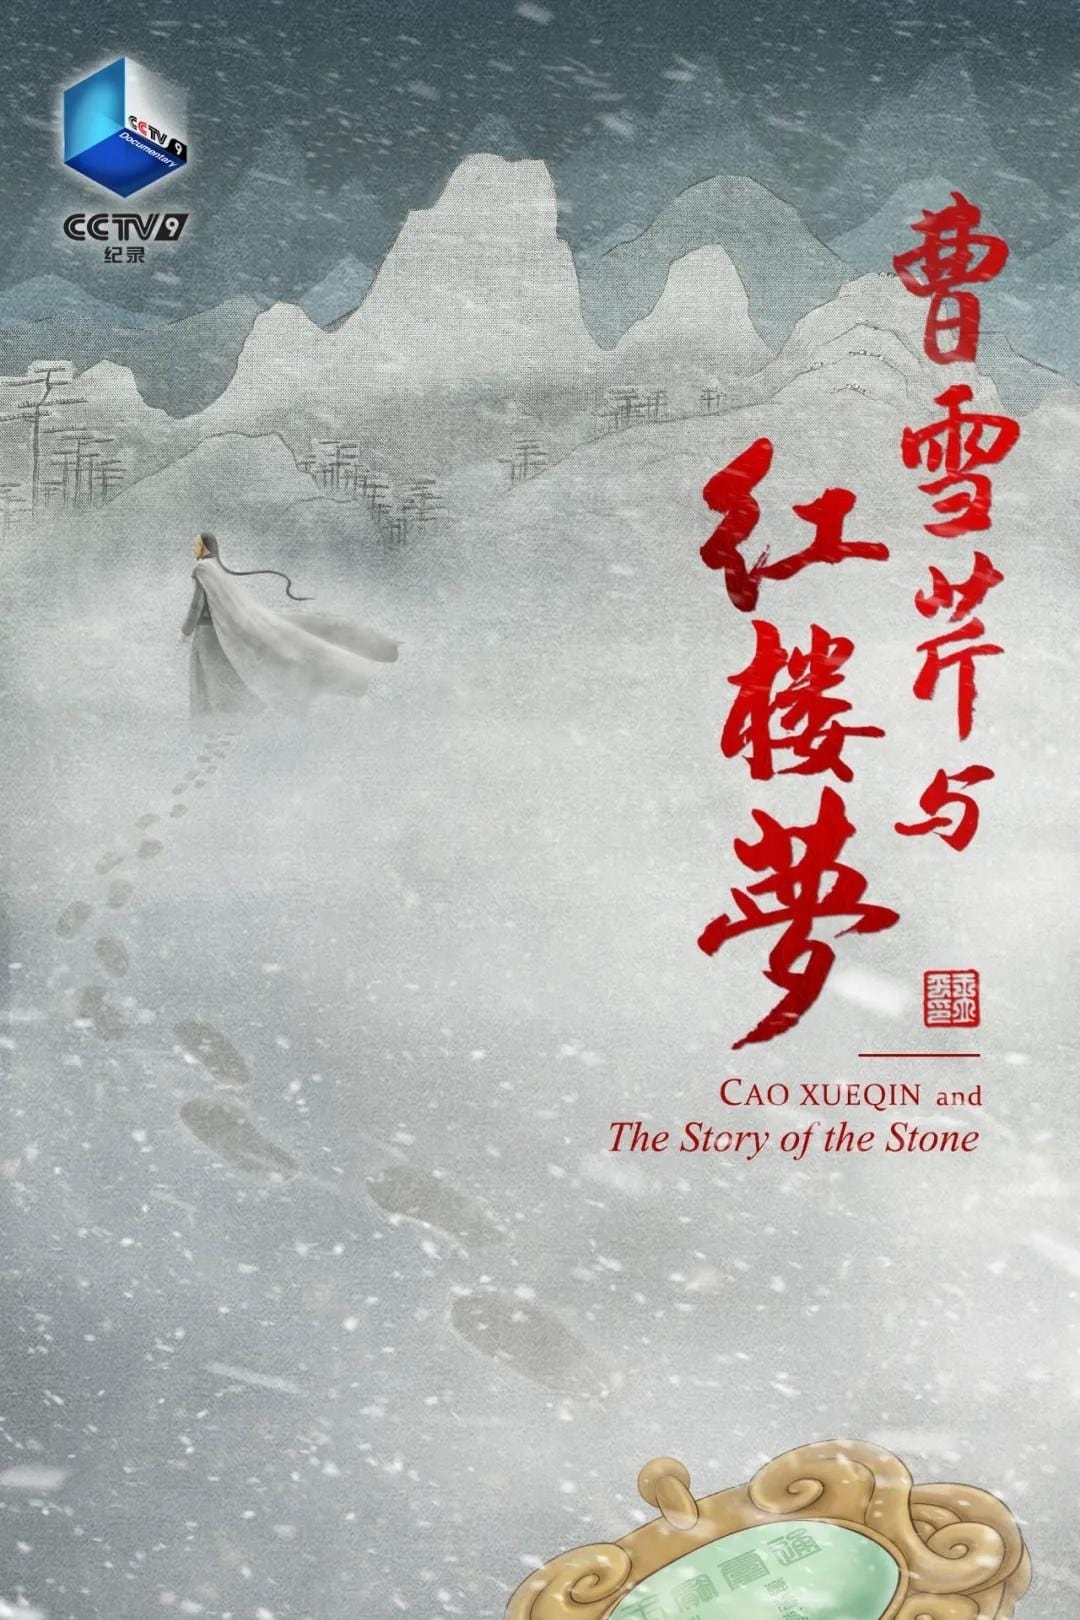 Cao Xueqin and The Story of the Stone